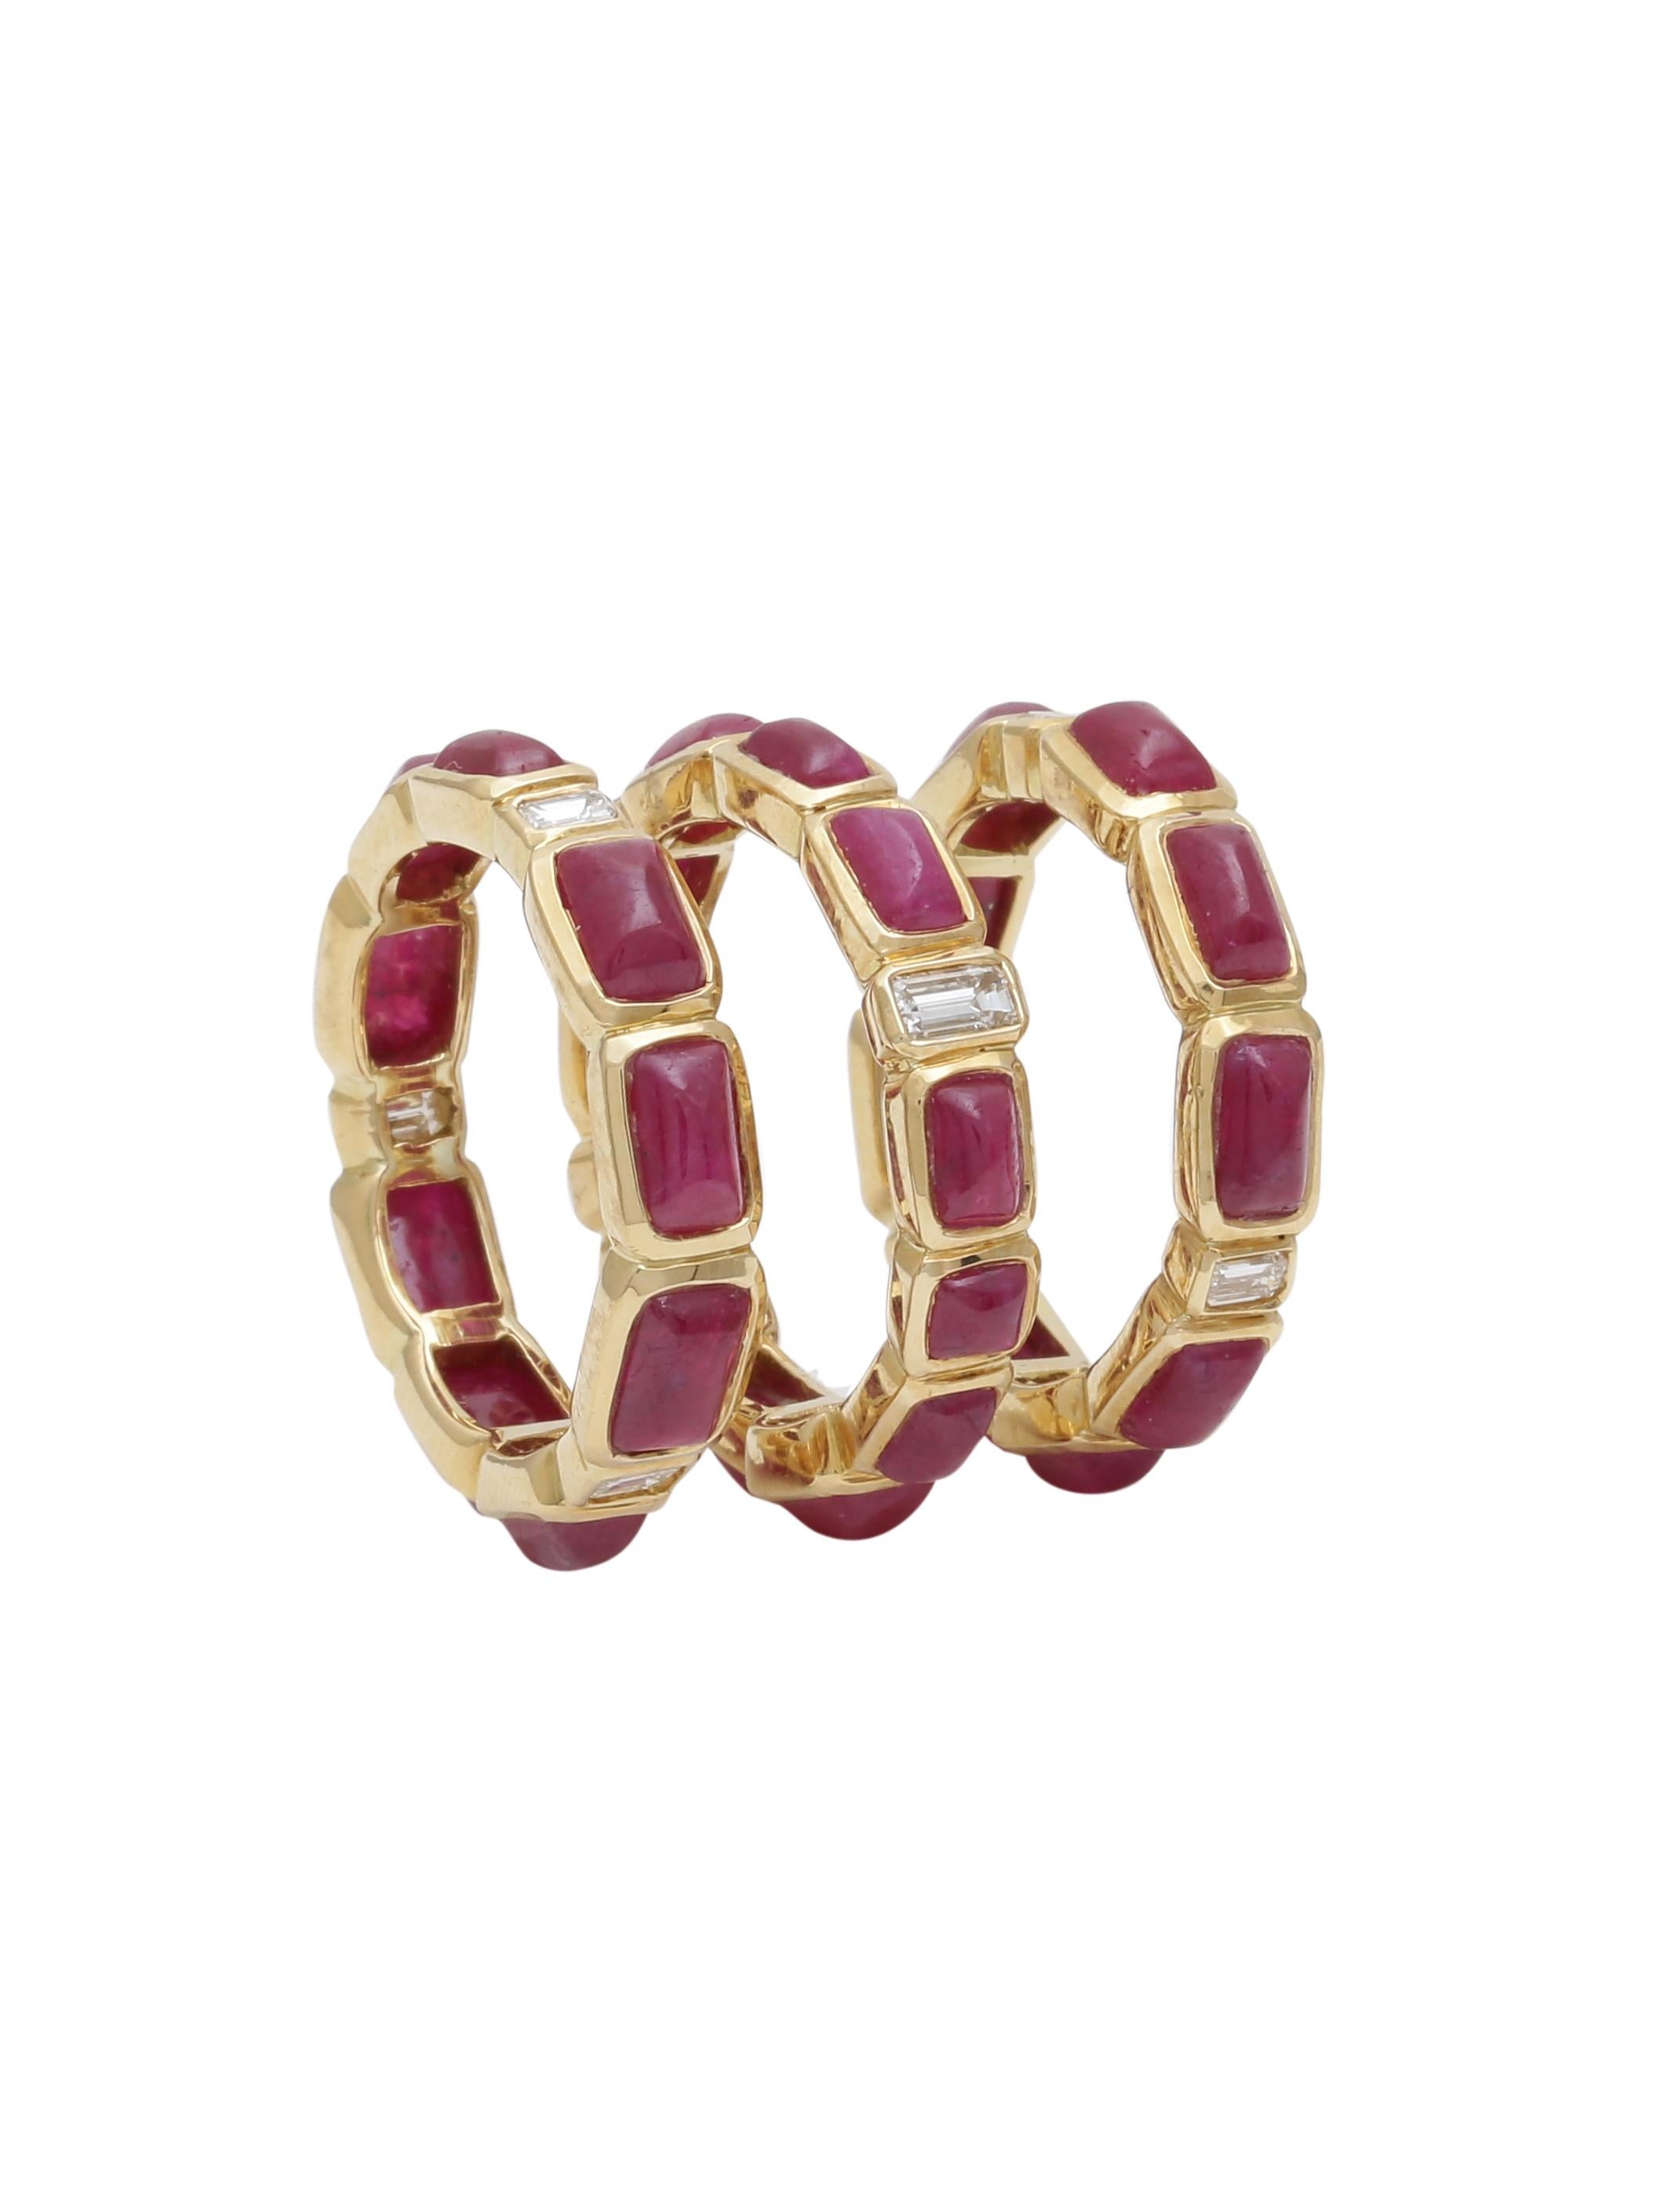 Stackable Ruby Cabochon and Diamond Baguette eternity band all handcrafted in 18K Yellow Gold. The Rubies in the ring are all natural and good quality diamond baguettes.
The simple yet elegant Ruby band can be worn 3 together or single depending on